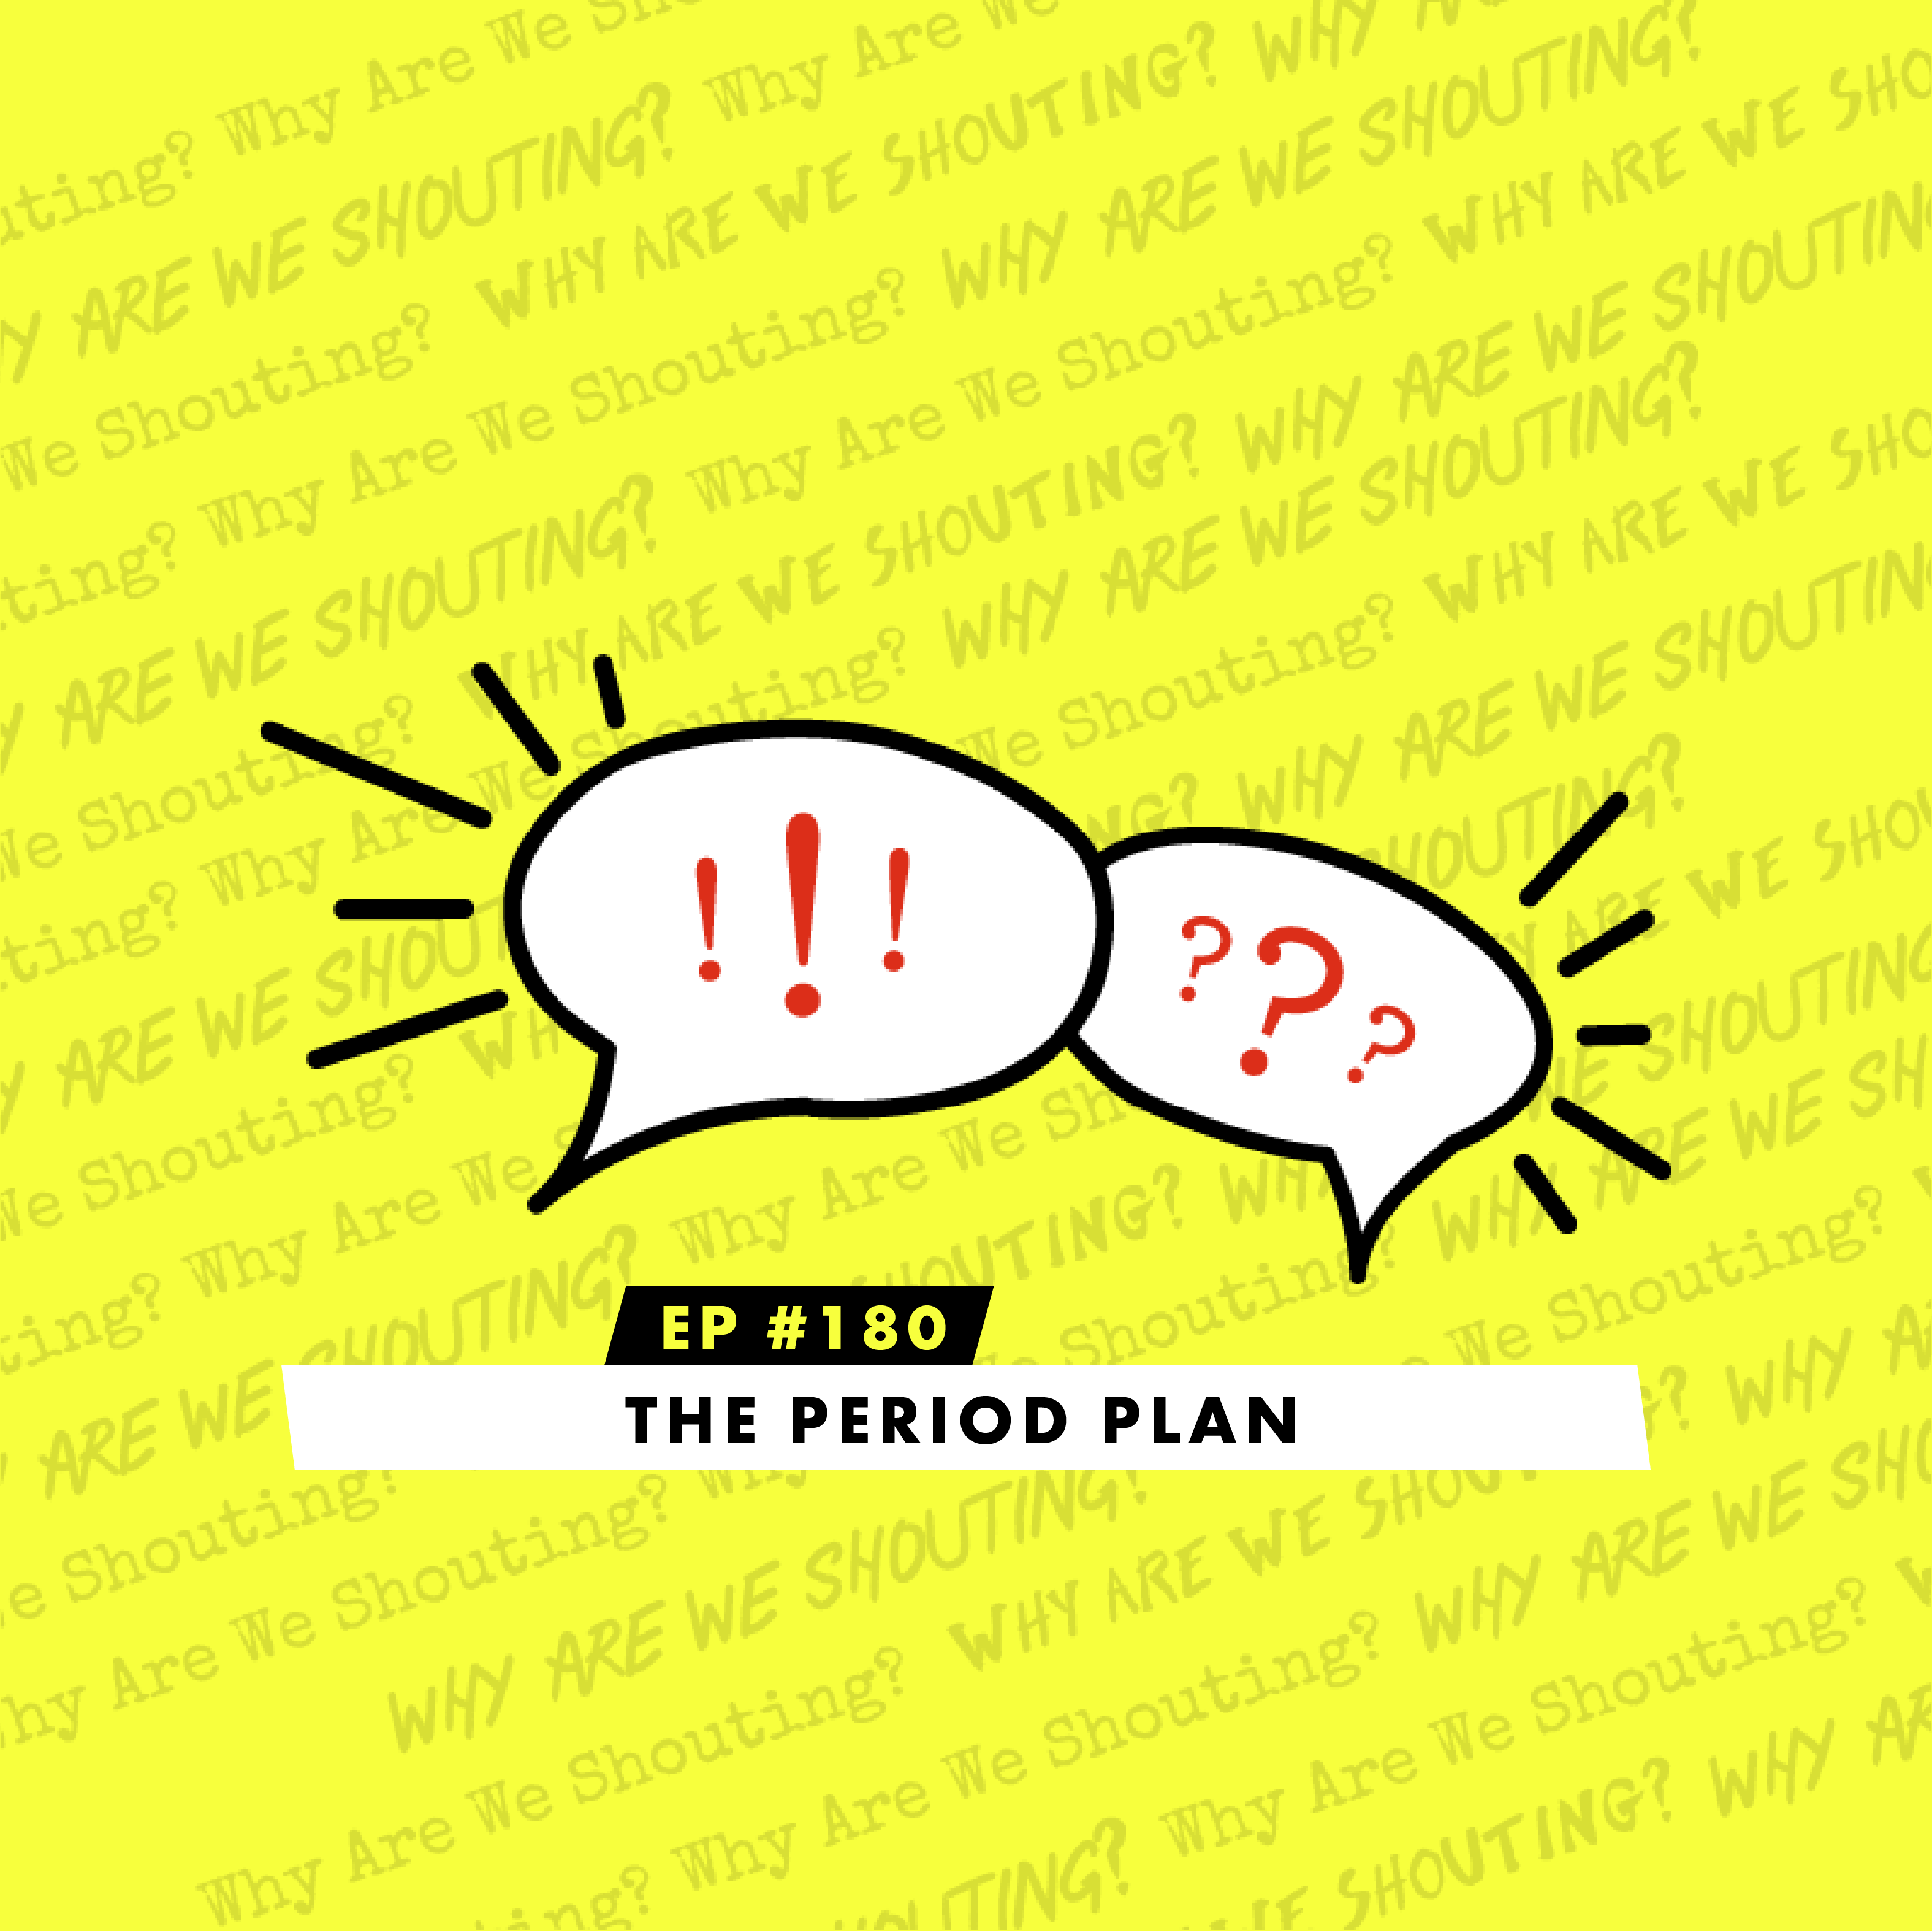 The Period Plan